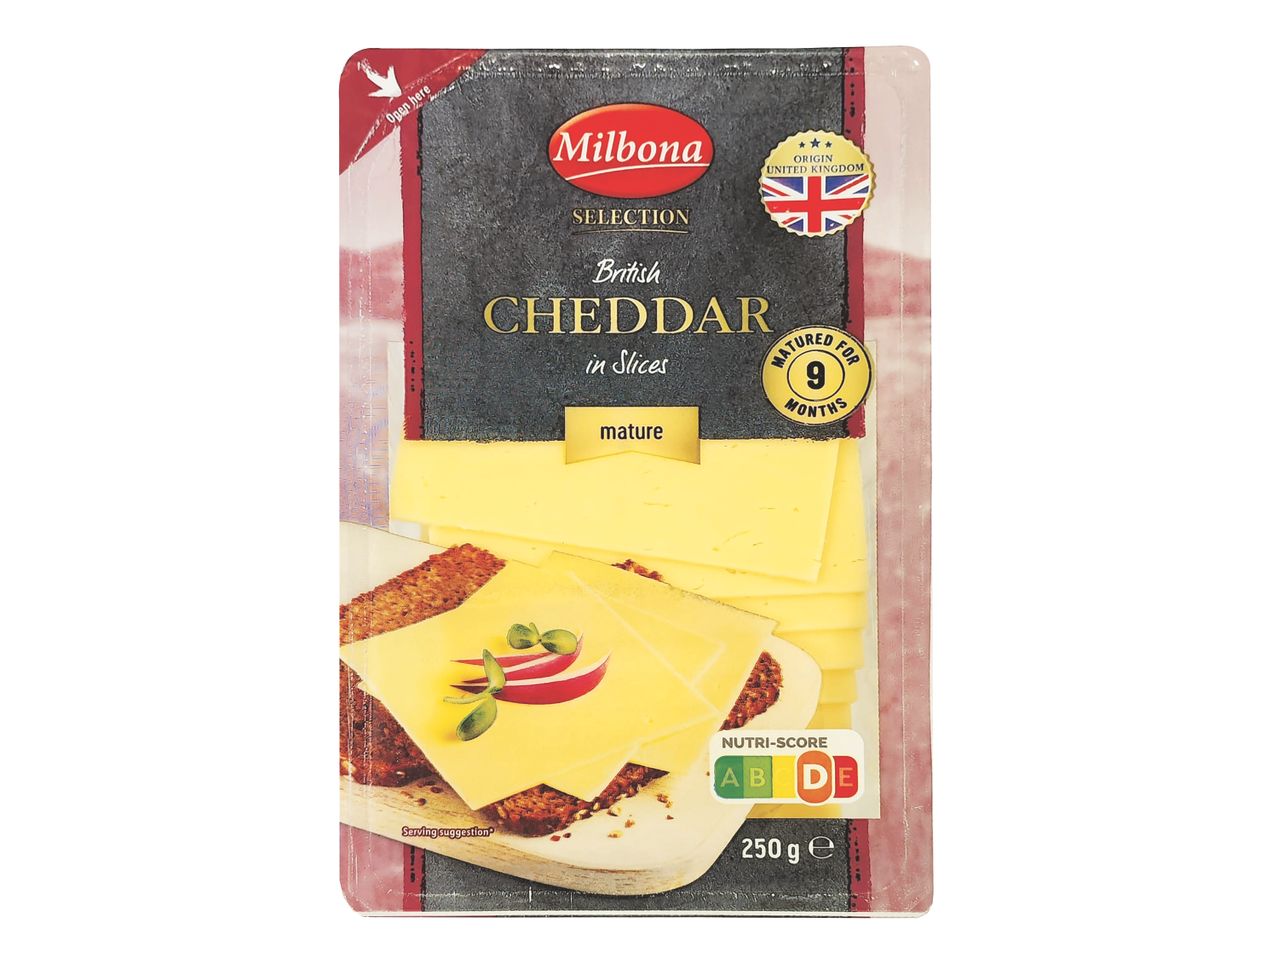 Go to full screen view: Mature British Cheddar in Slices - Image 1